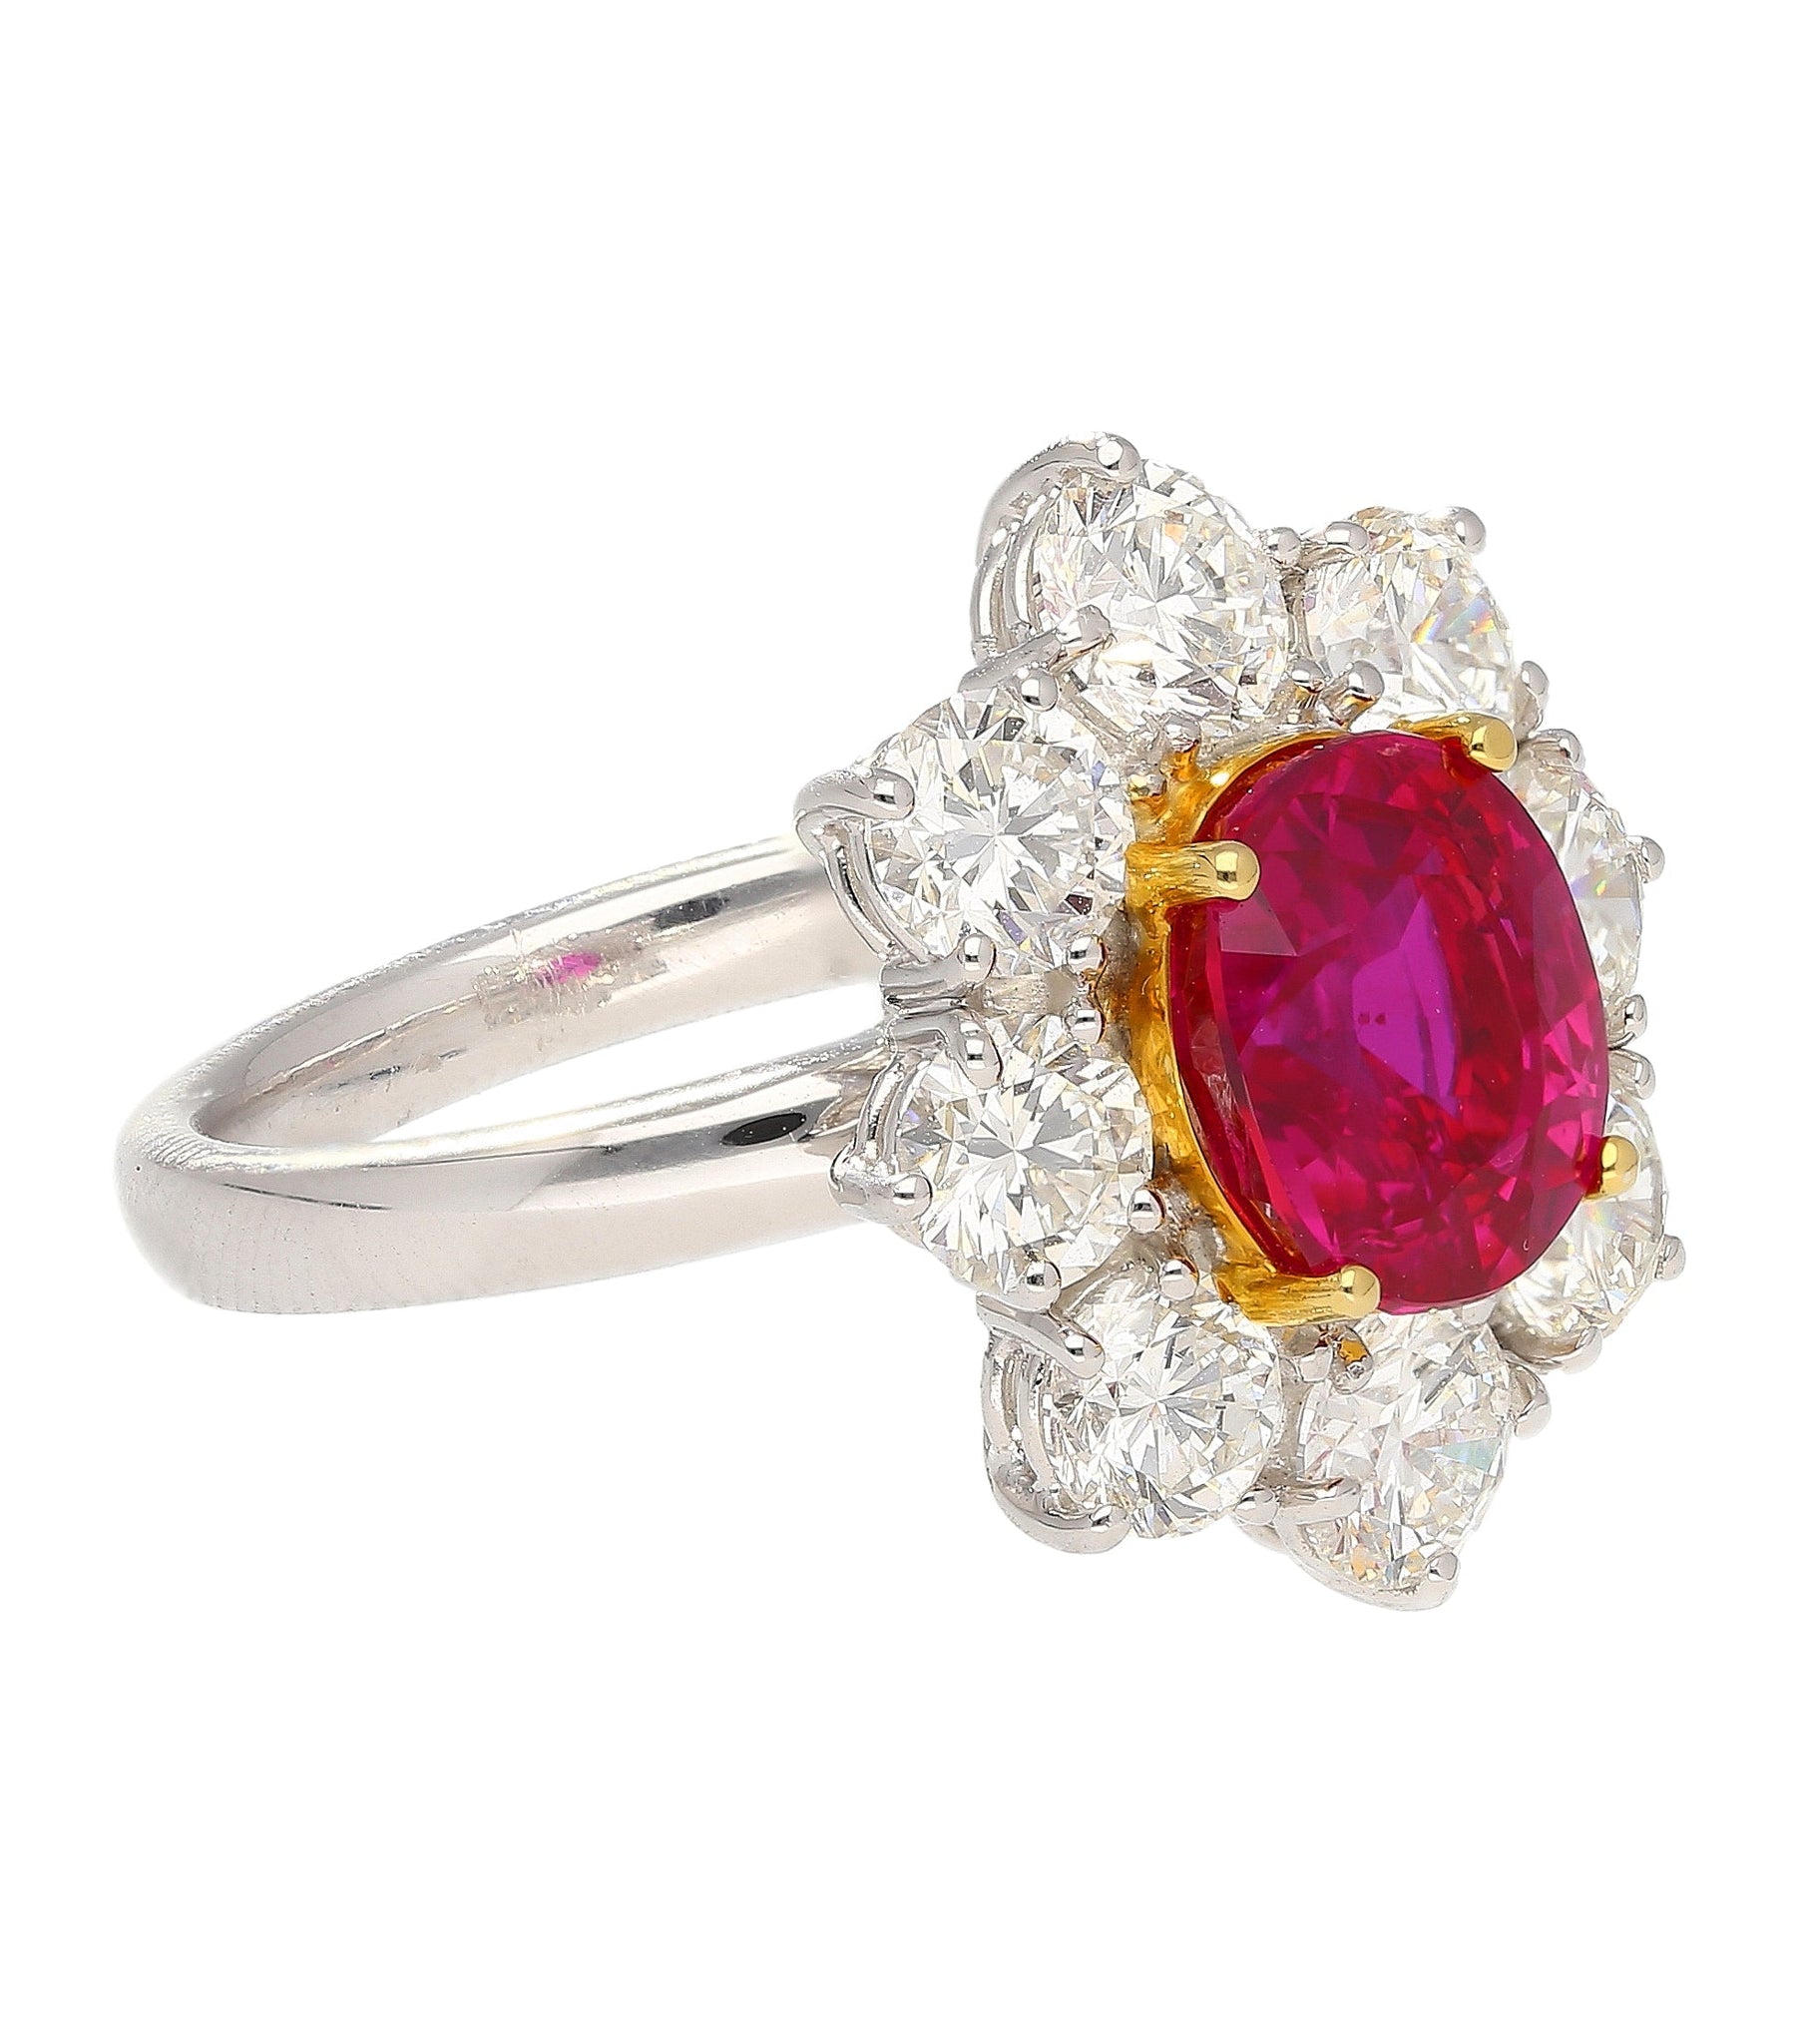 3.80 Carat Oval Cut No Heat Burma Ruby Ring With Round Diamond Halo in Platinum-Rings-ASSAY